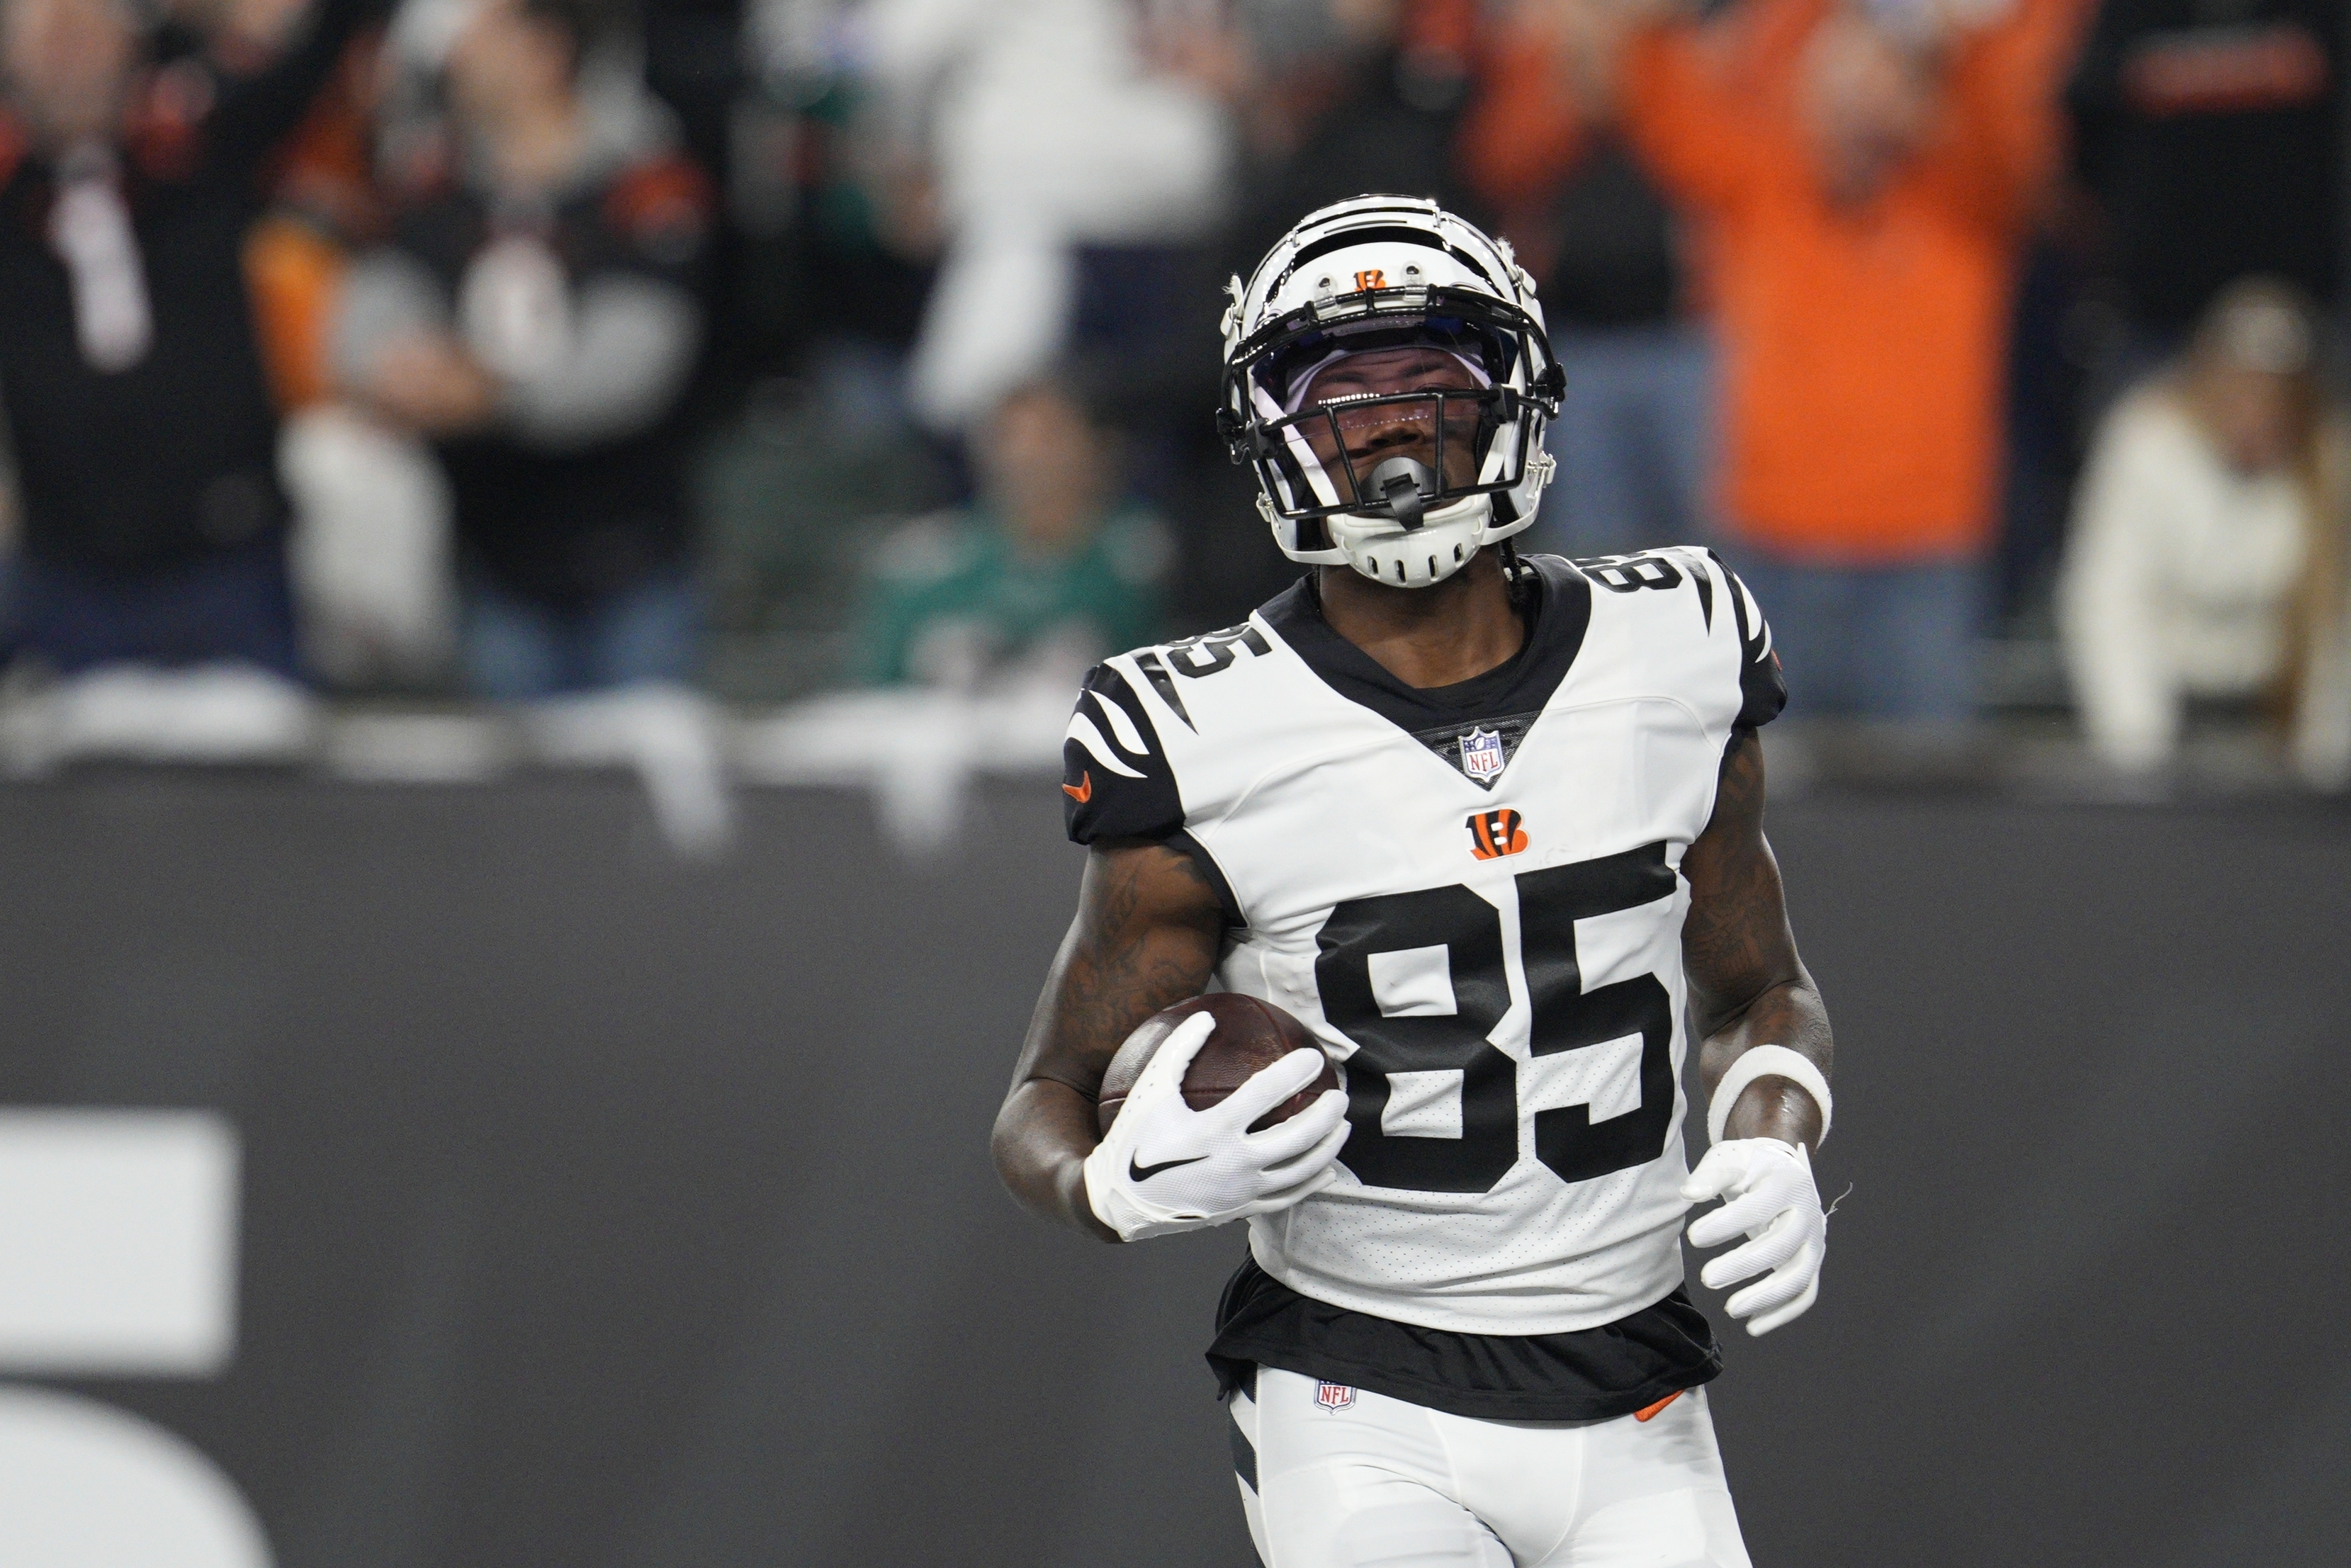 PHOTOS: Bengals fly stunning all-whites on Thursday Night Football